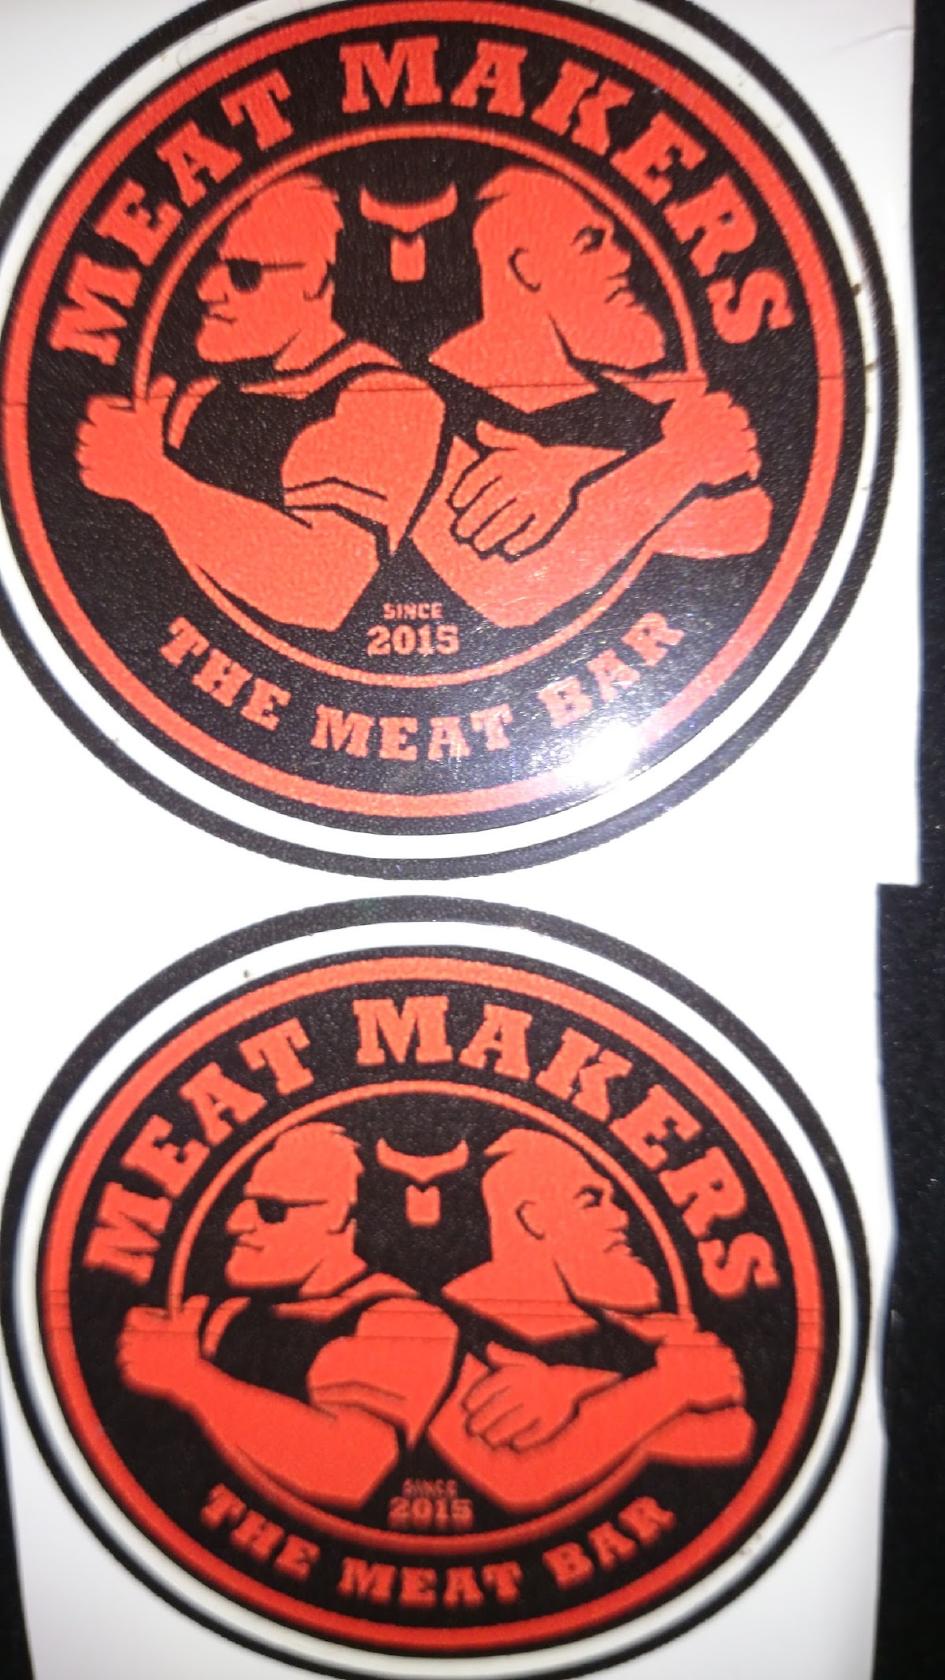 Meat makers